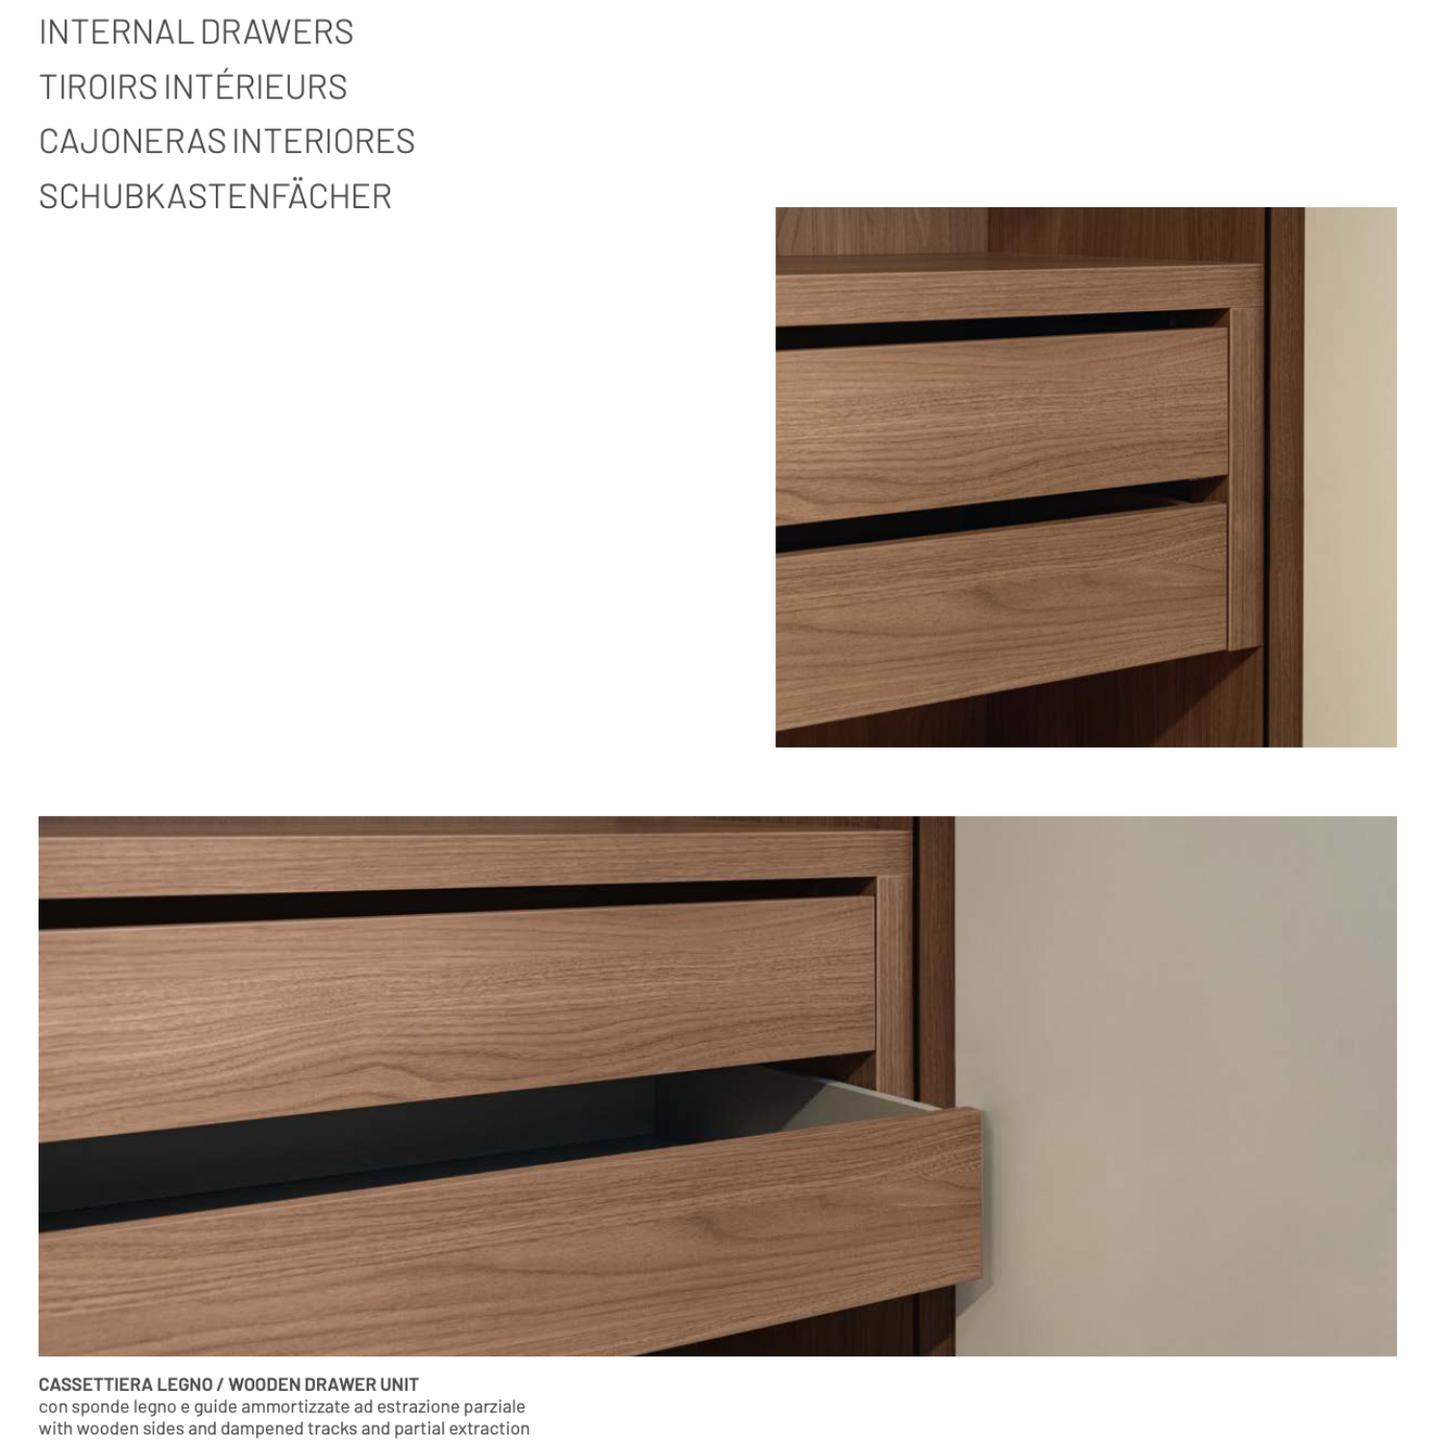 Emotion Up Simply Wardrobe with Matt Lacquer Hinged Doors